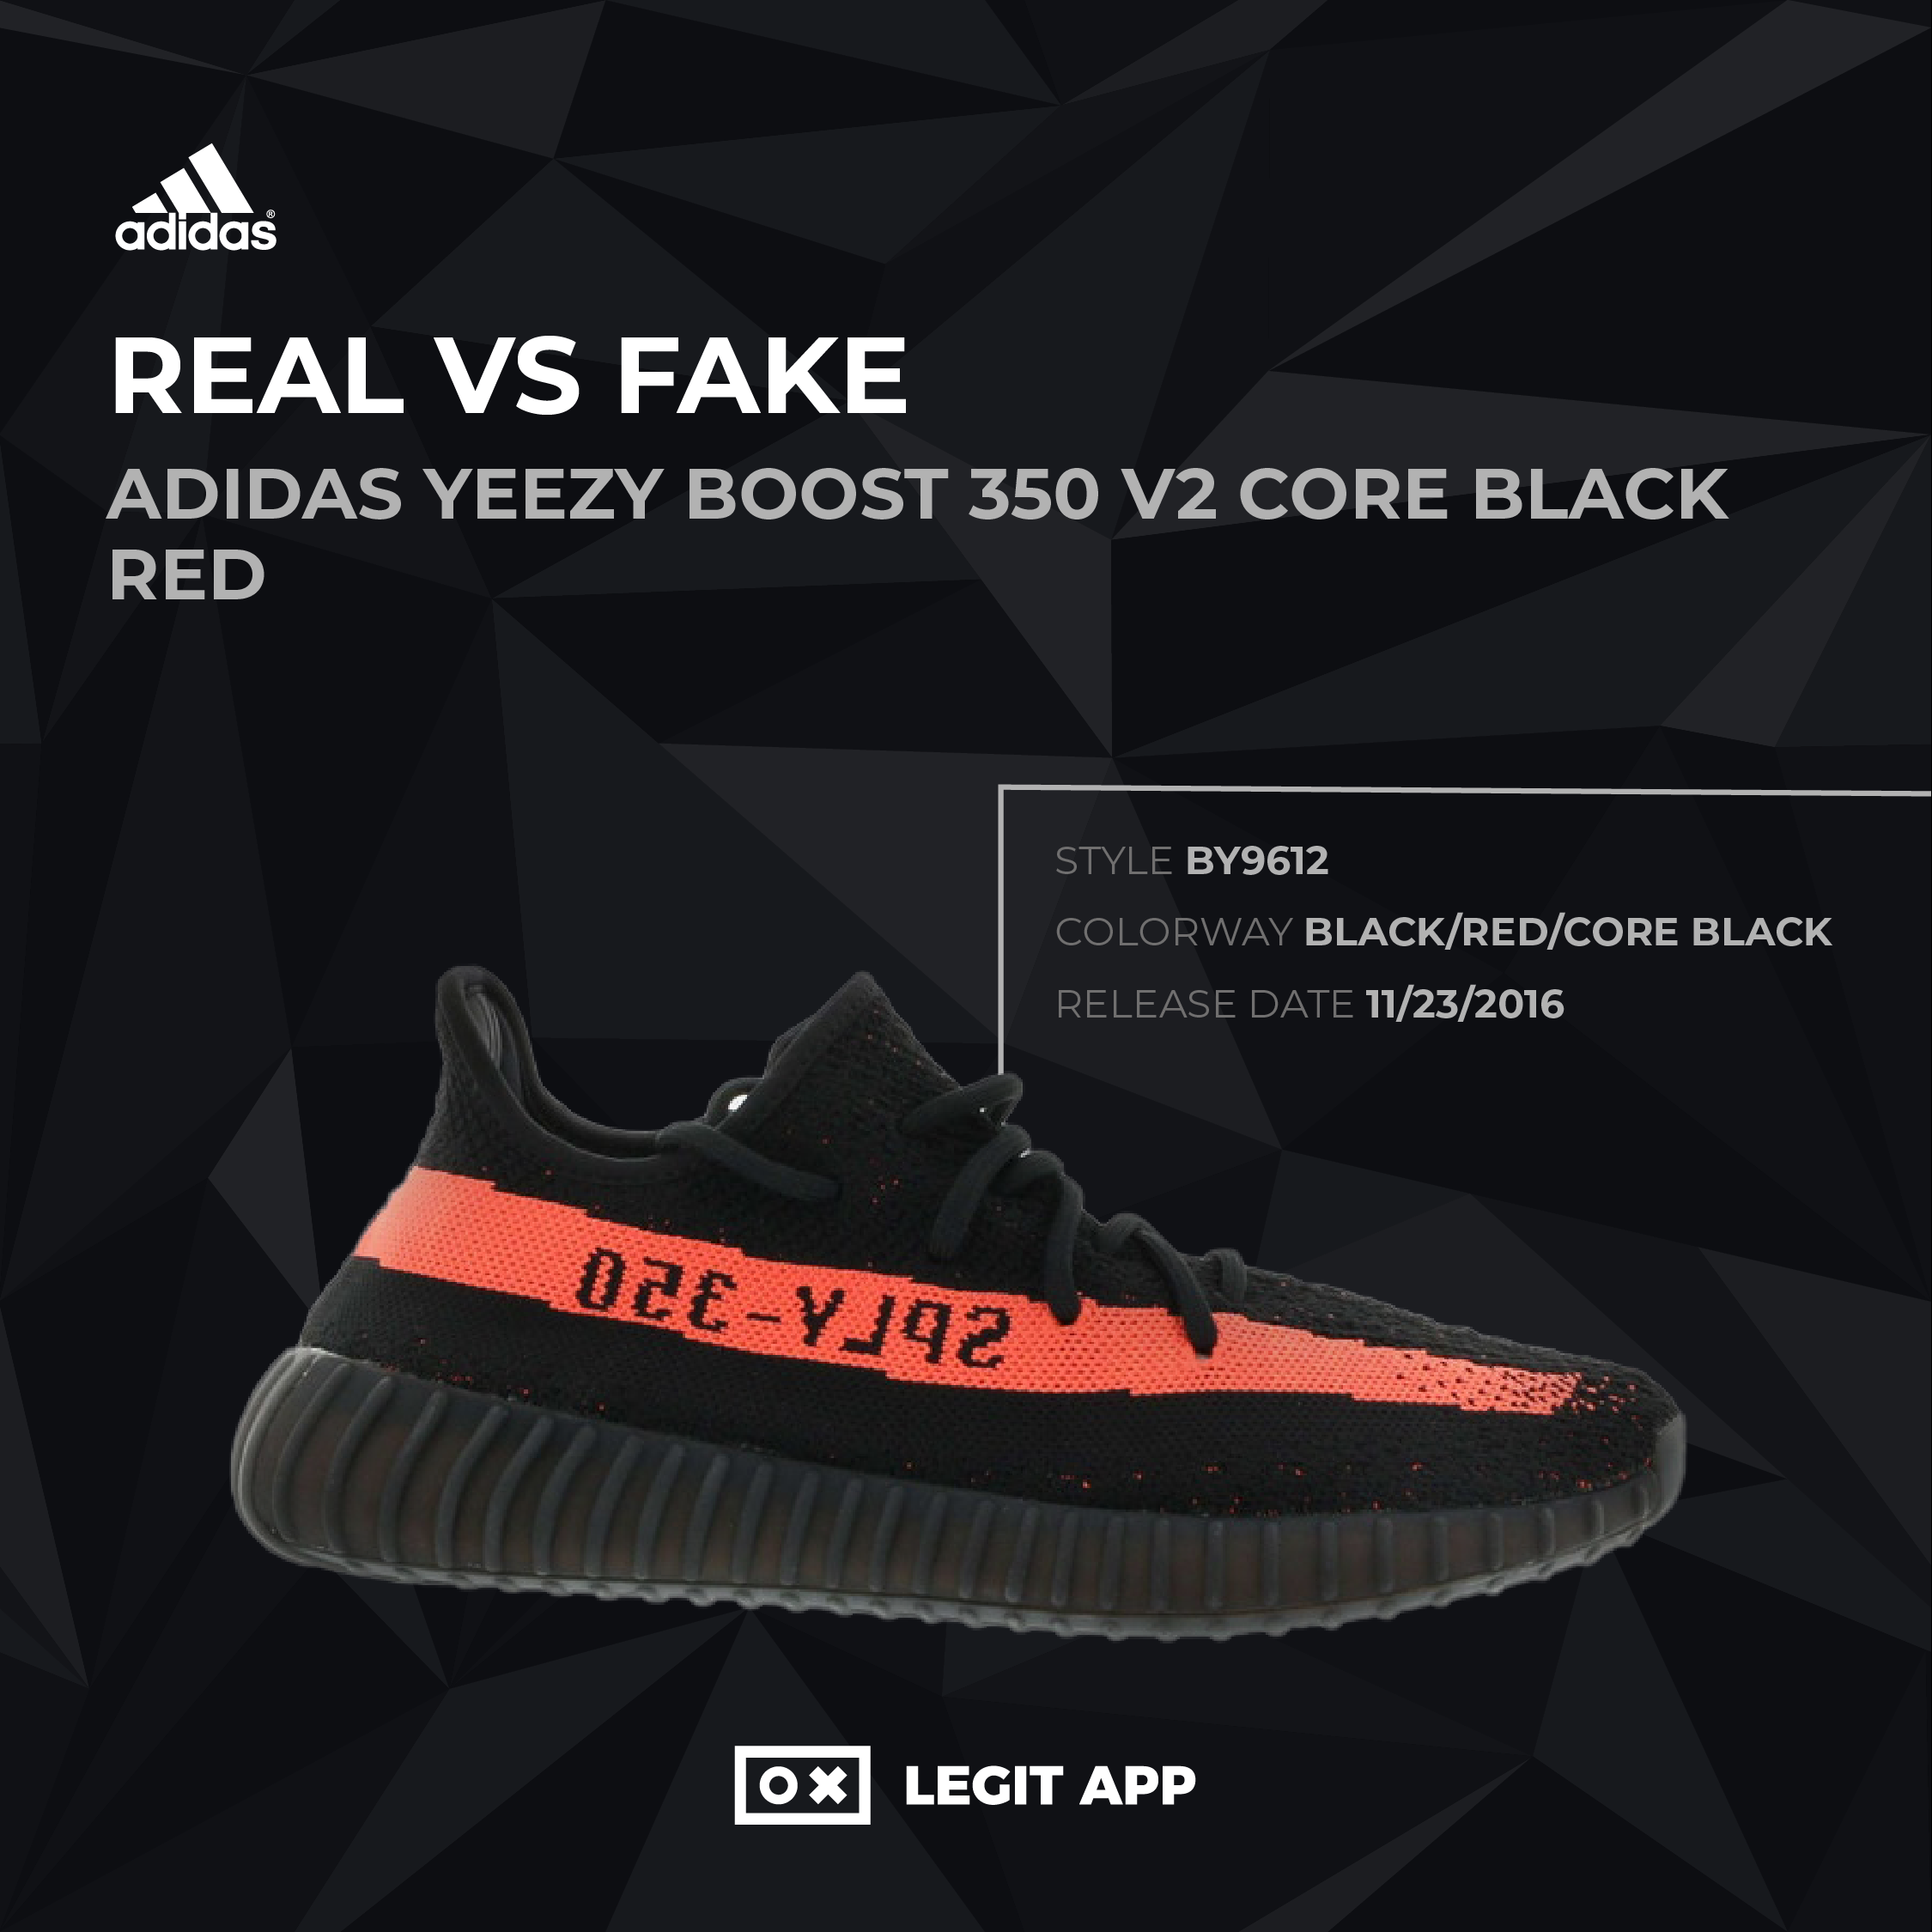 red core yeezy